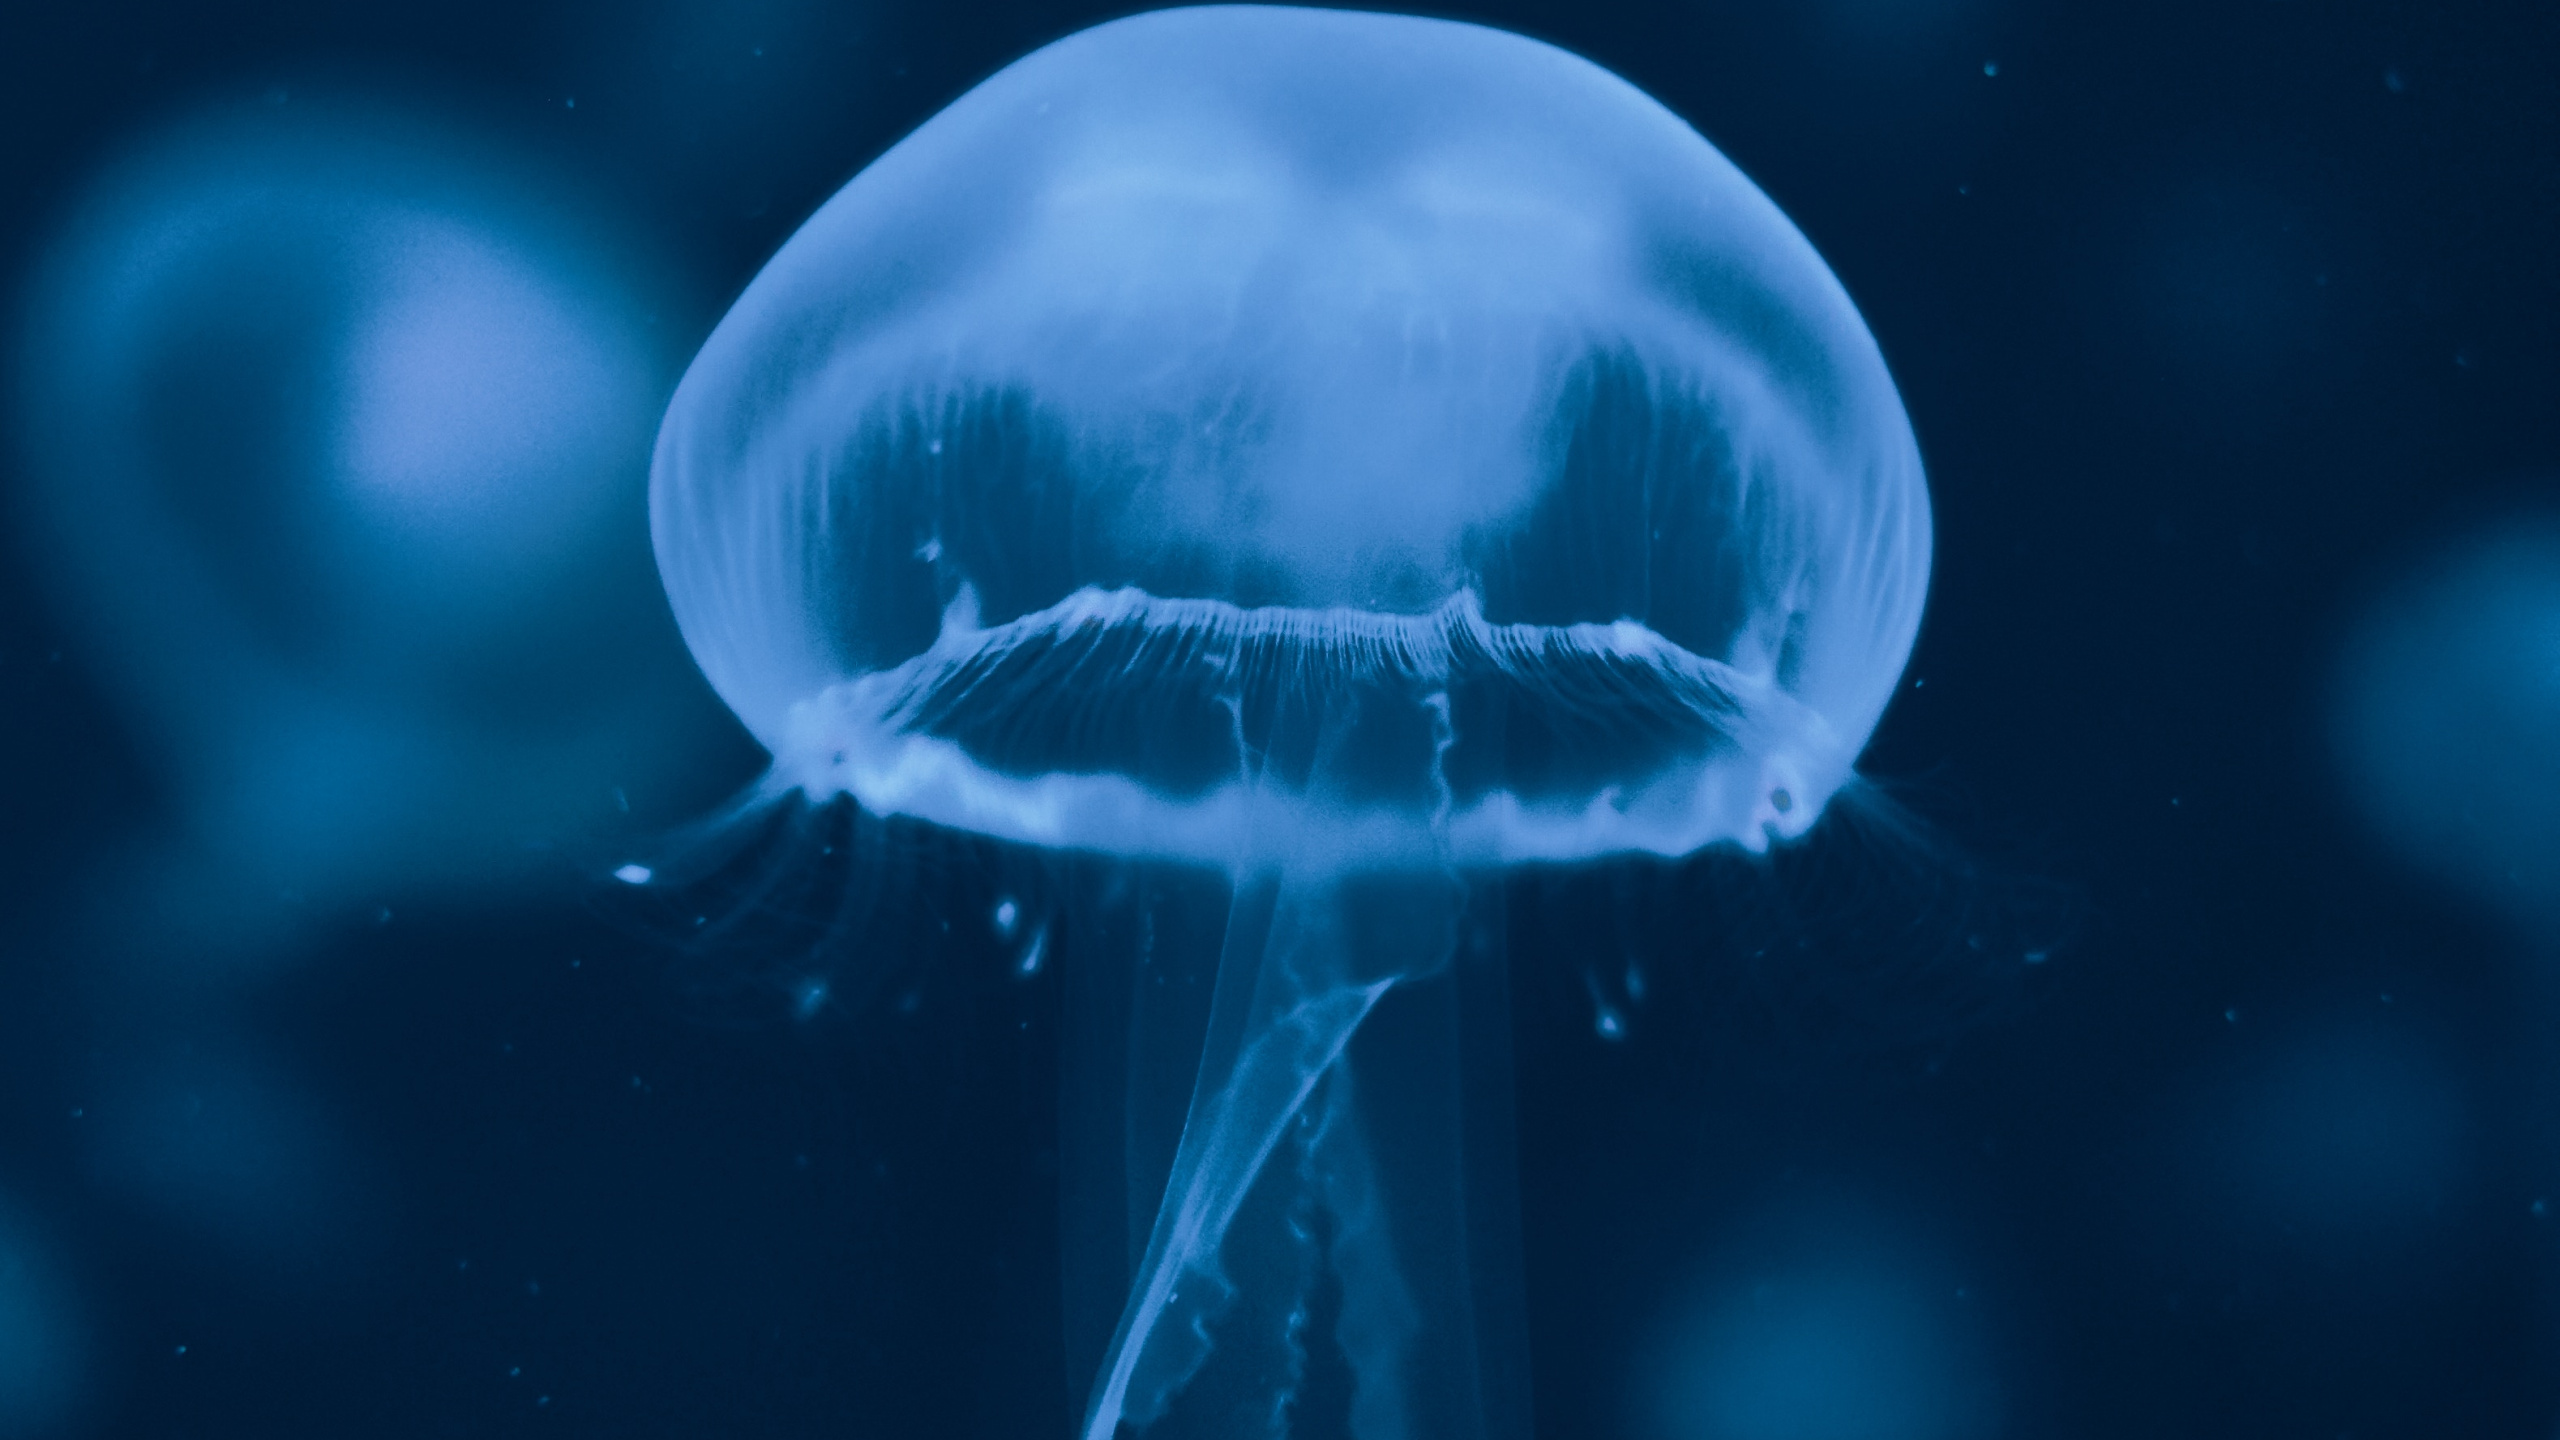 Blue and White Jellyfish Illustration. Wallpaper in 2560x1440 Resolution